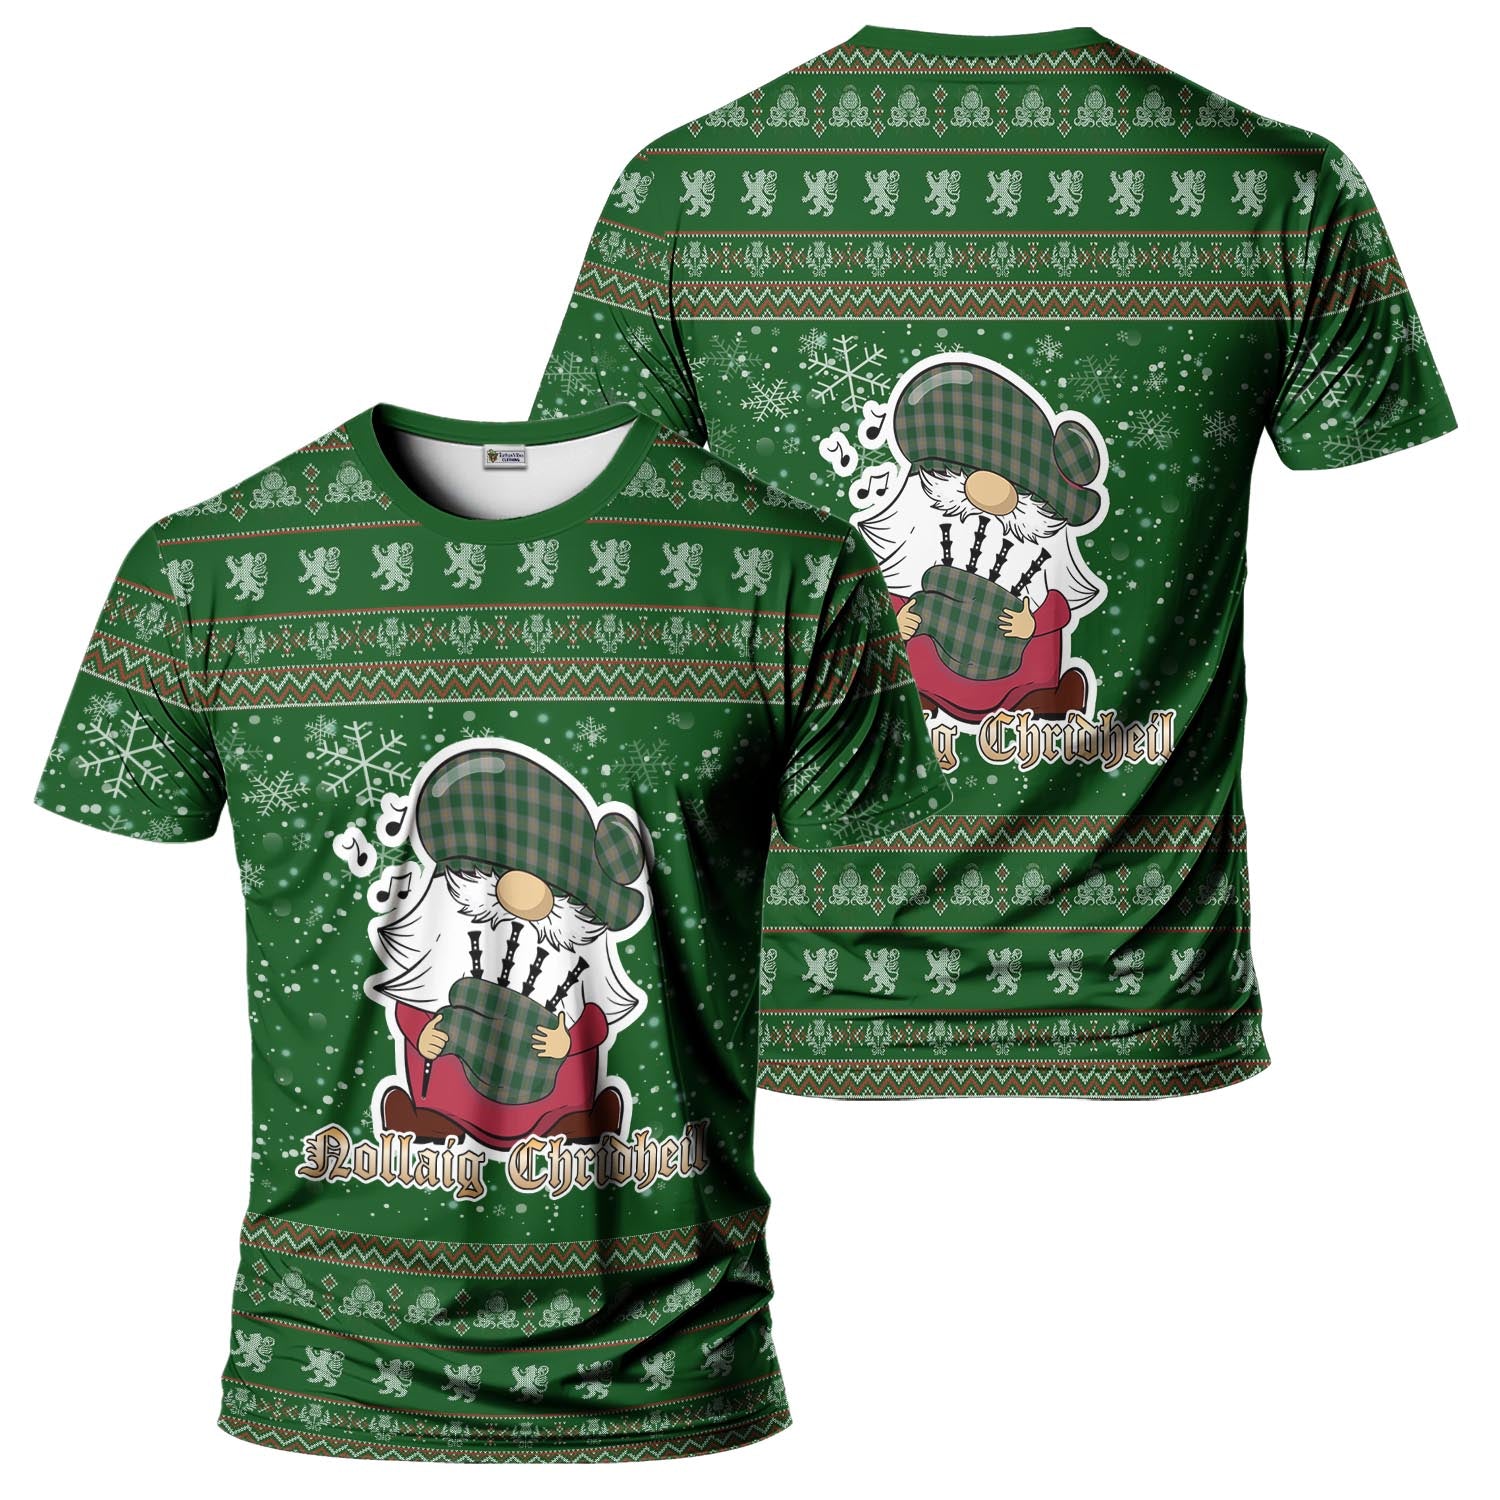 Ledford Clan Christmas Family T-Shirt with Funny Gnome Playing Bagpipes Men's Shirt Green - Tartanvibesclothing